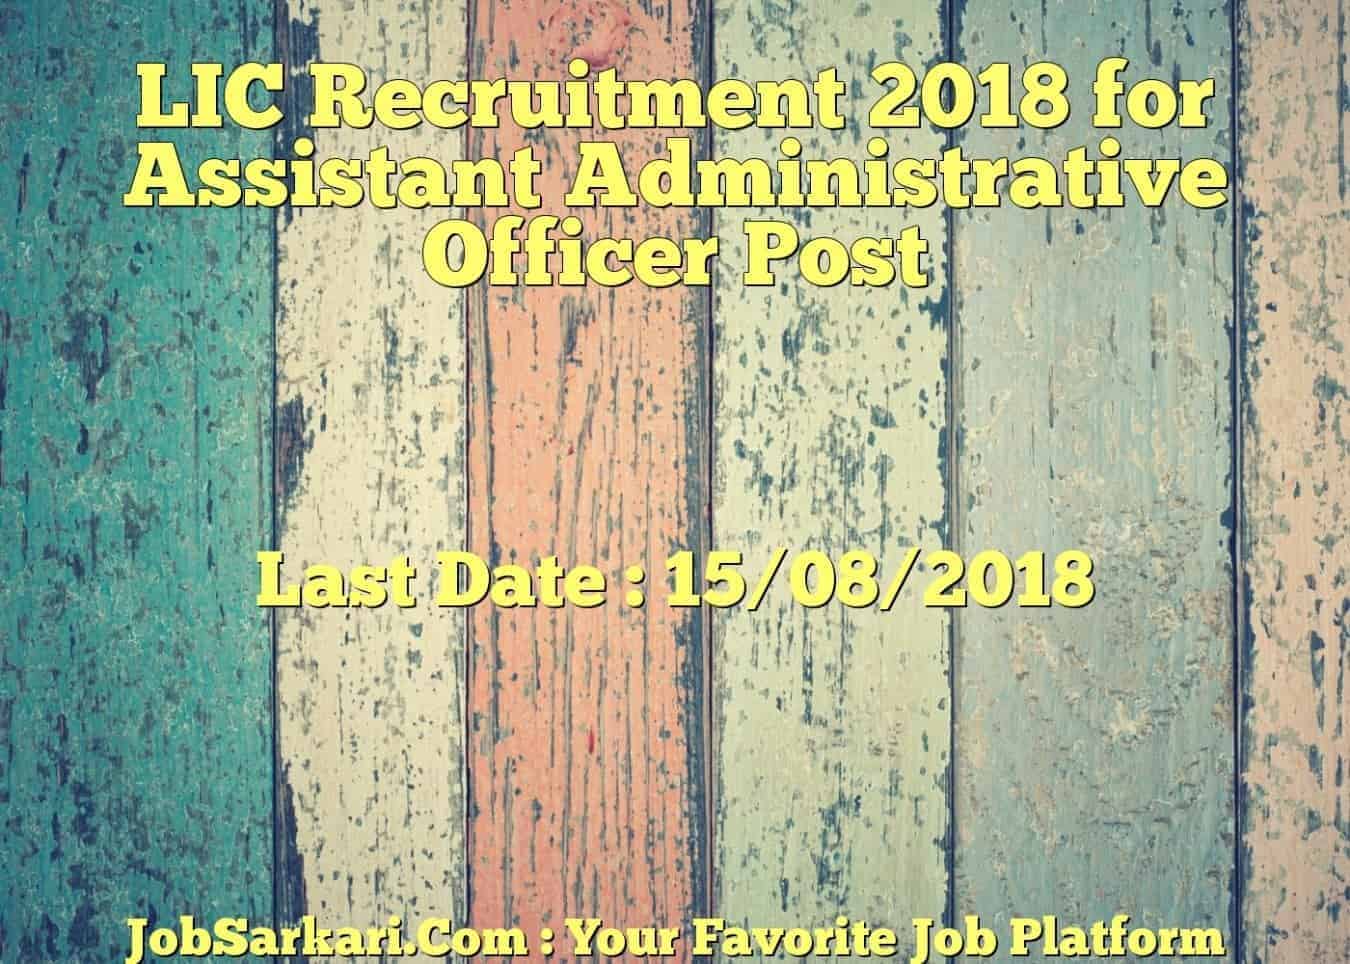 LIC Recruitment 2018 for Assistant Administrative Officer Post